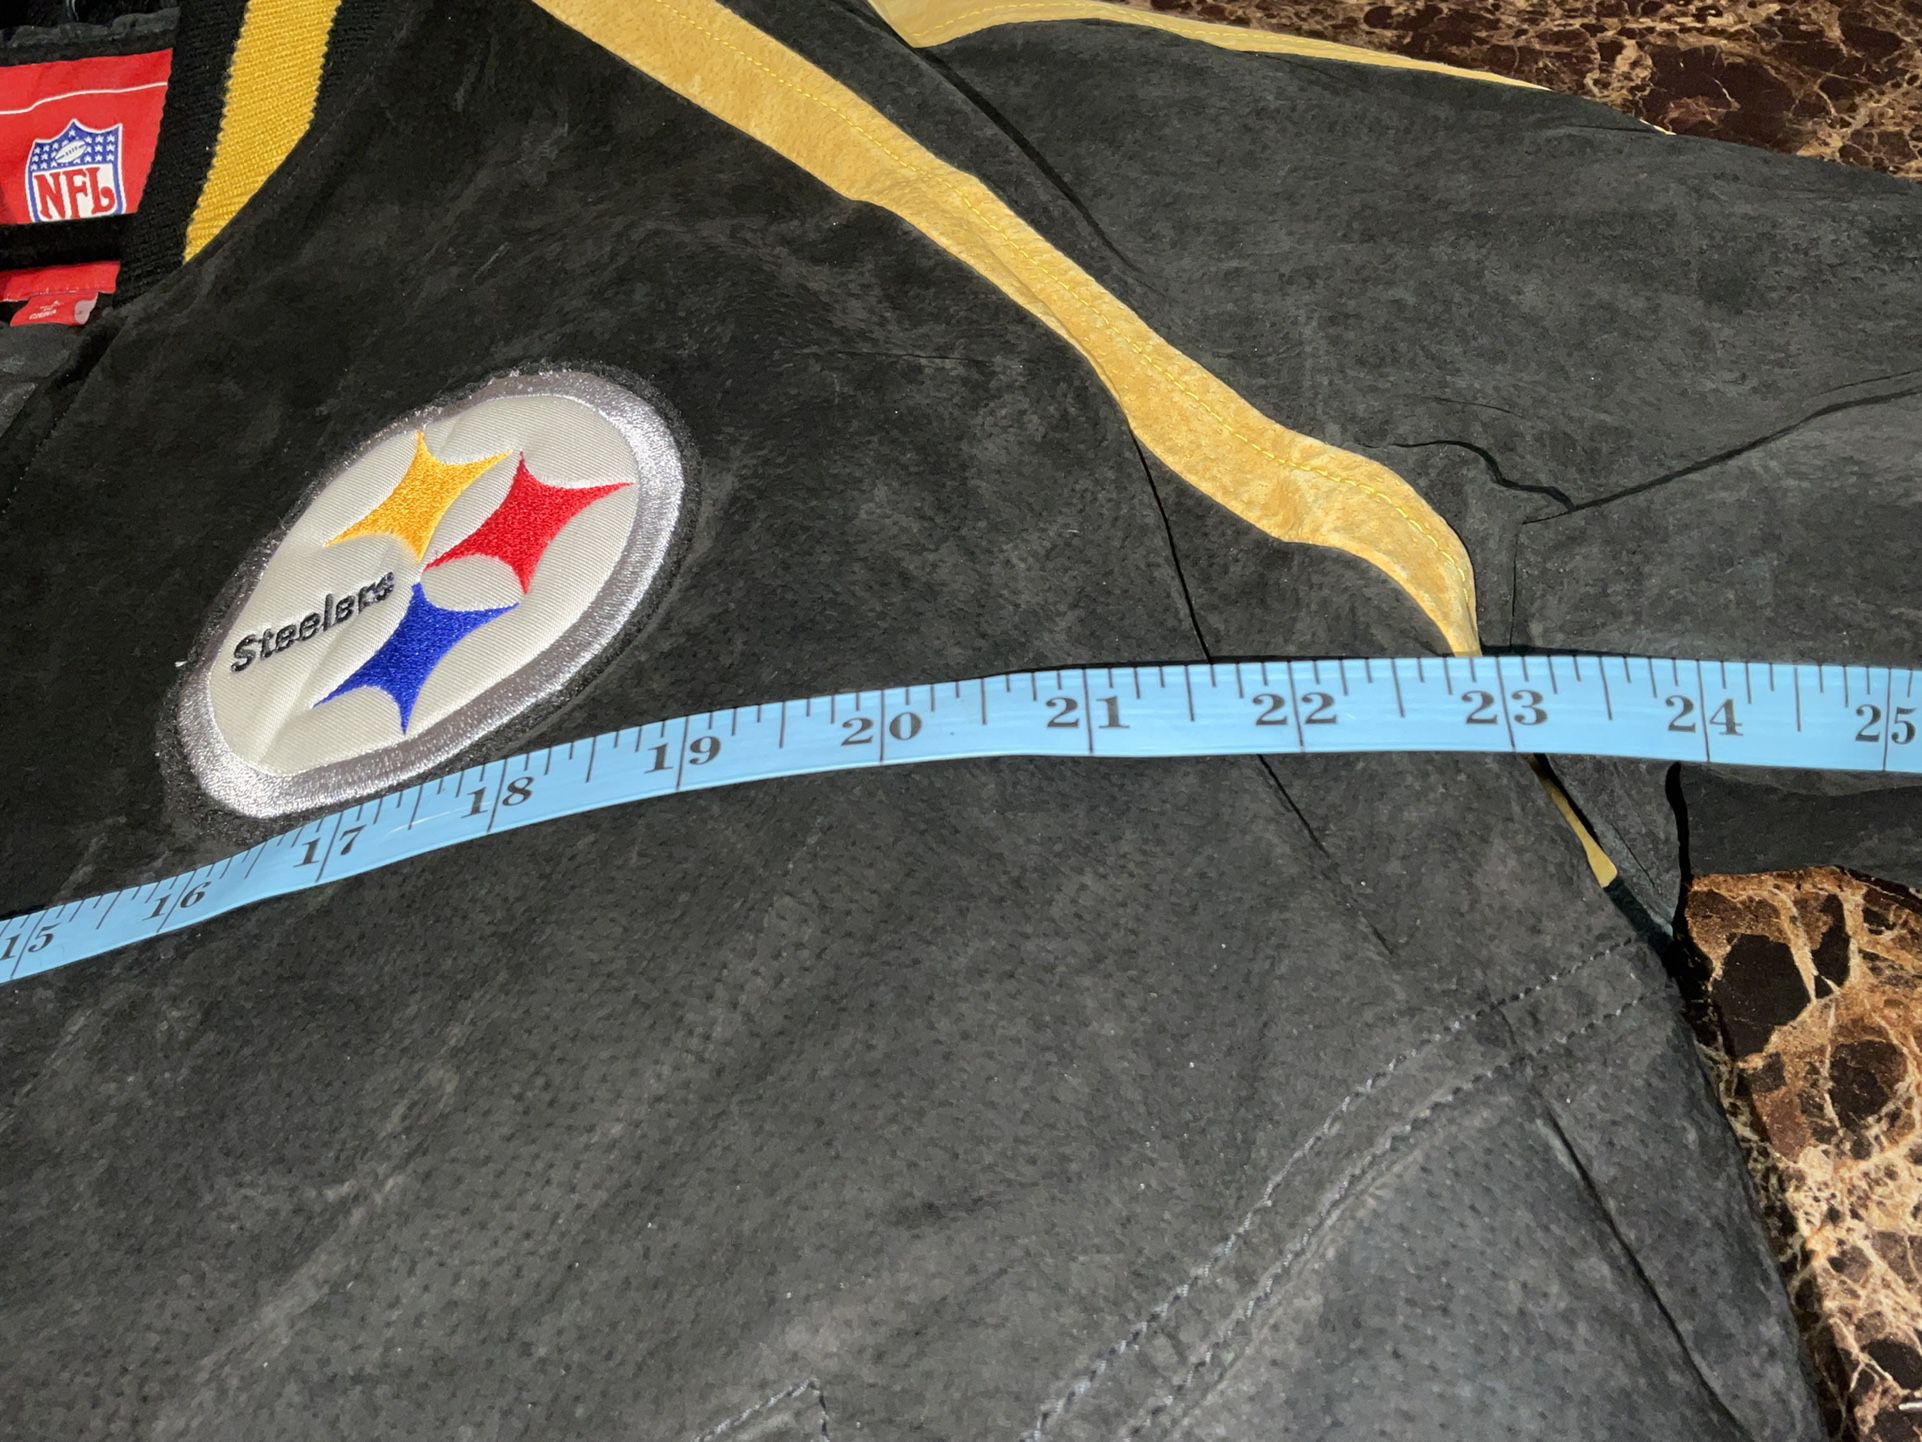 Pittsburgh Steelers Suede Leather Heavy Jacket Zip Front Large NEW New no tag  (10+ Steeler items in stock, can combine shipping)